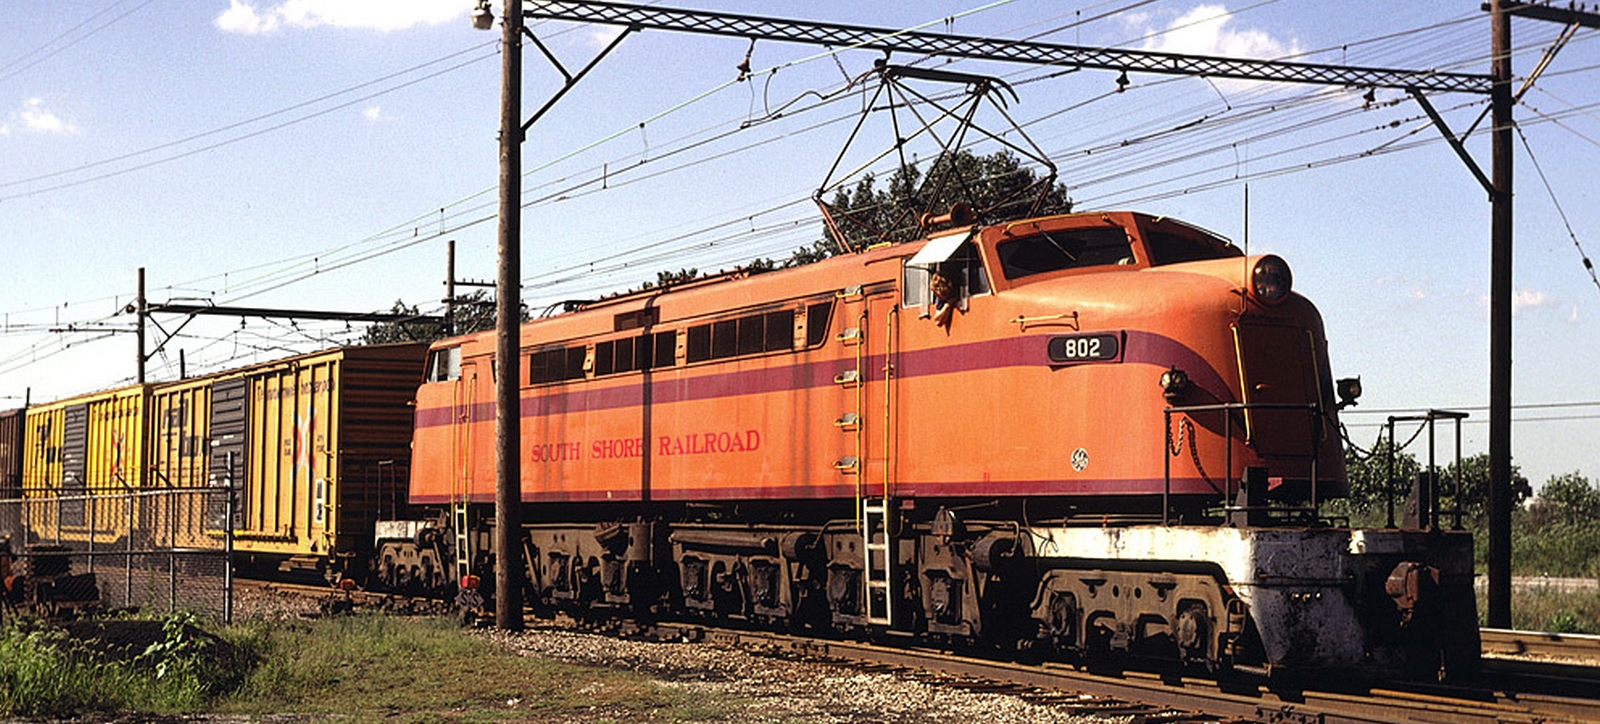 No. 802 of the South Shore Railroad in August 1980 at Hammond, Indiana